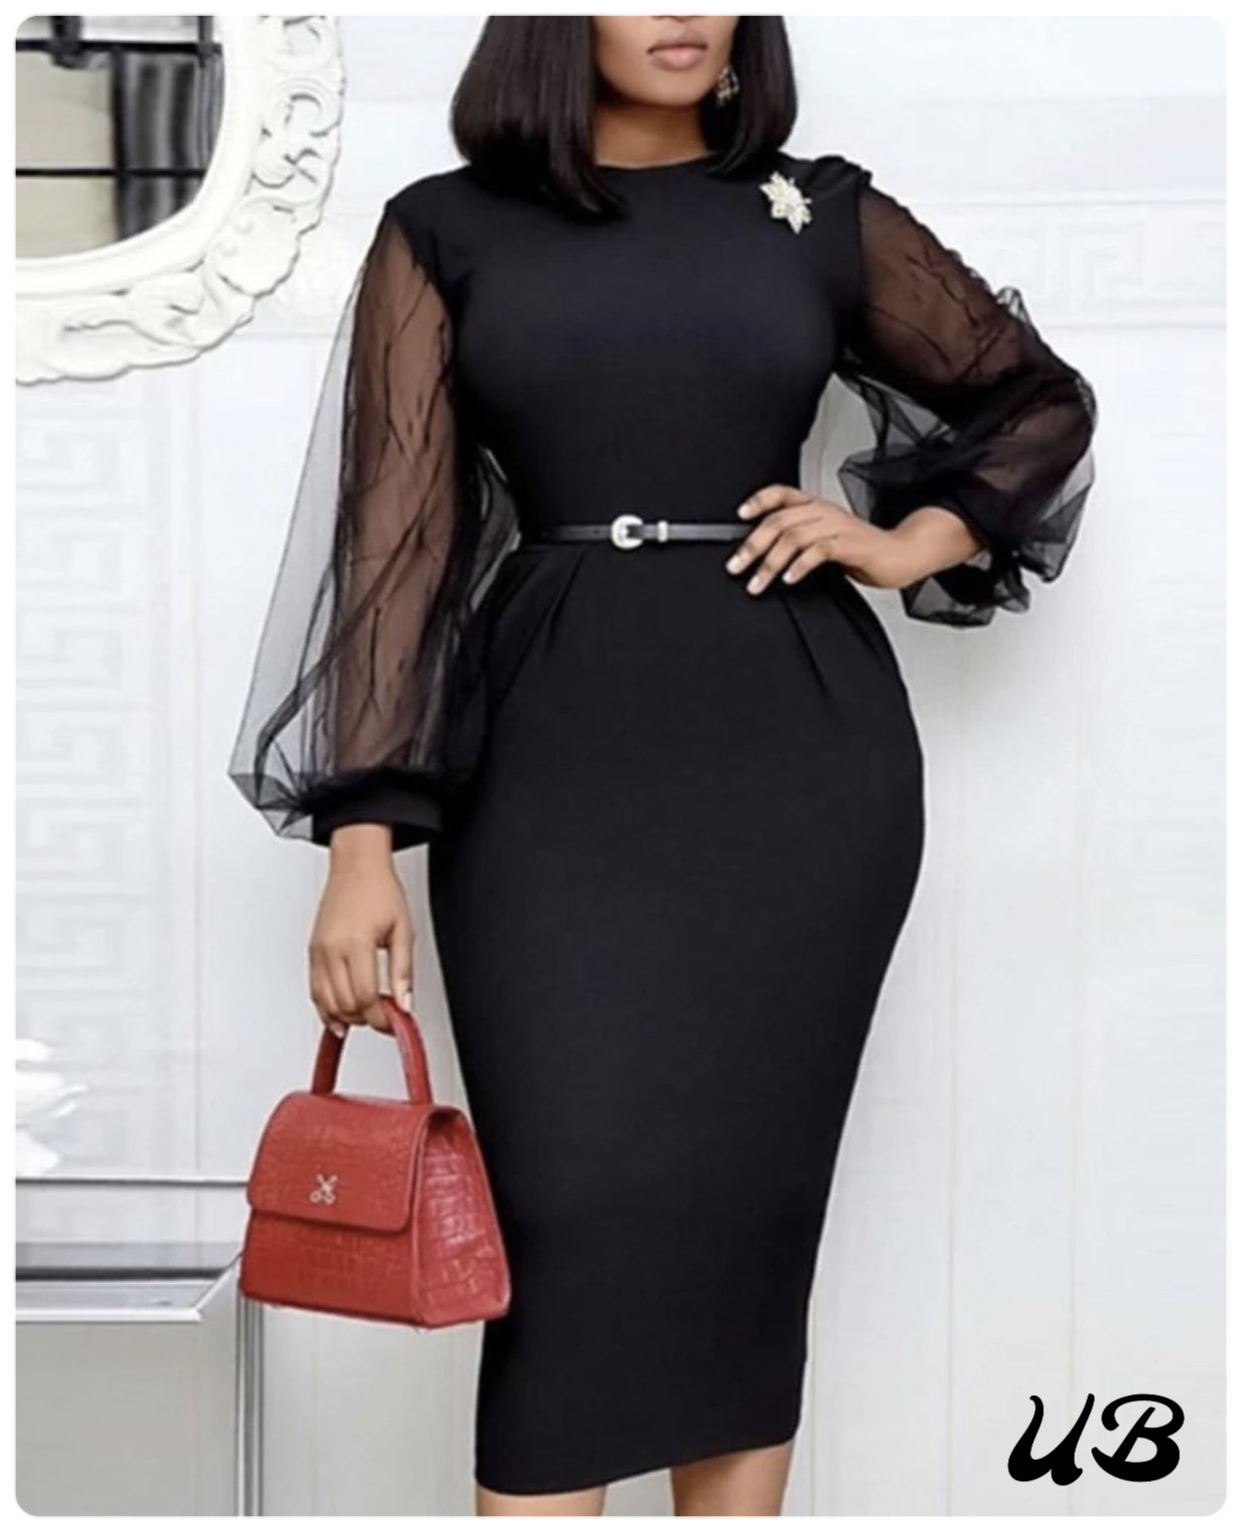 Black Sheer Sleeve Cocktail Dress, Sizes Small - 2XLarge